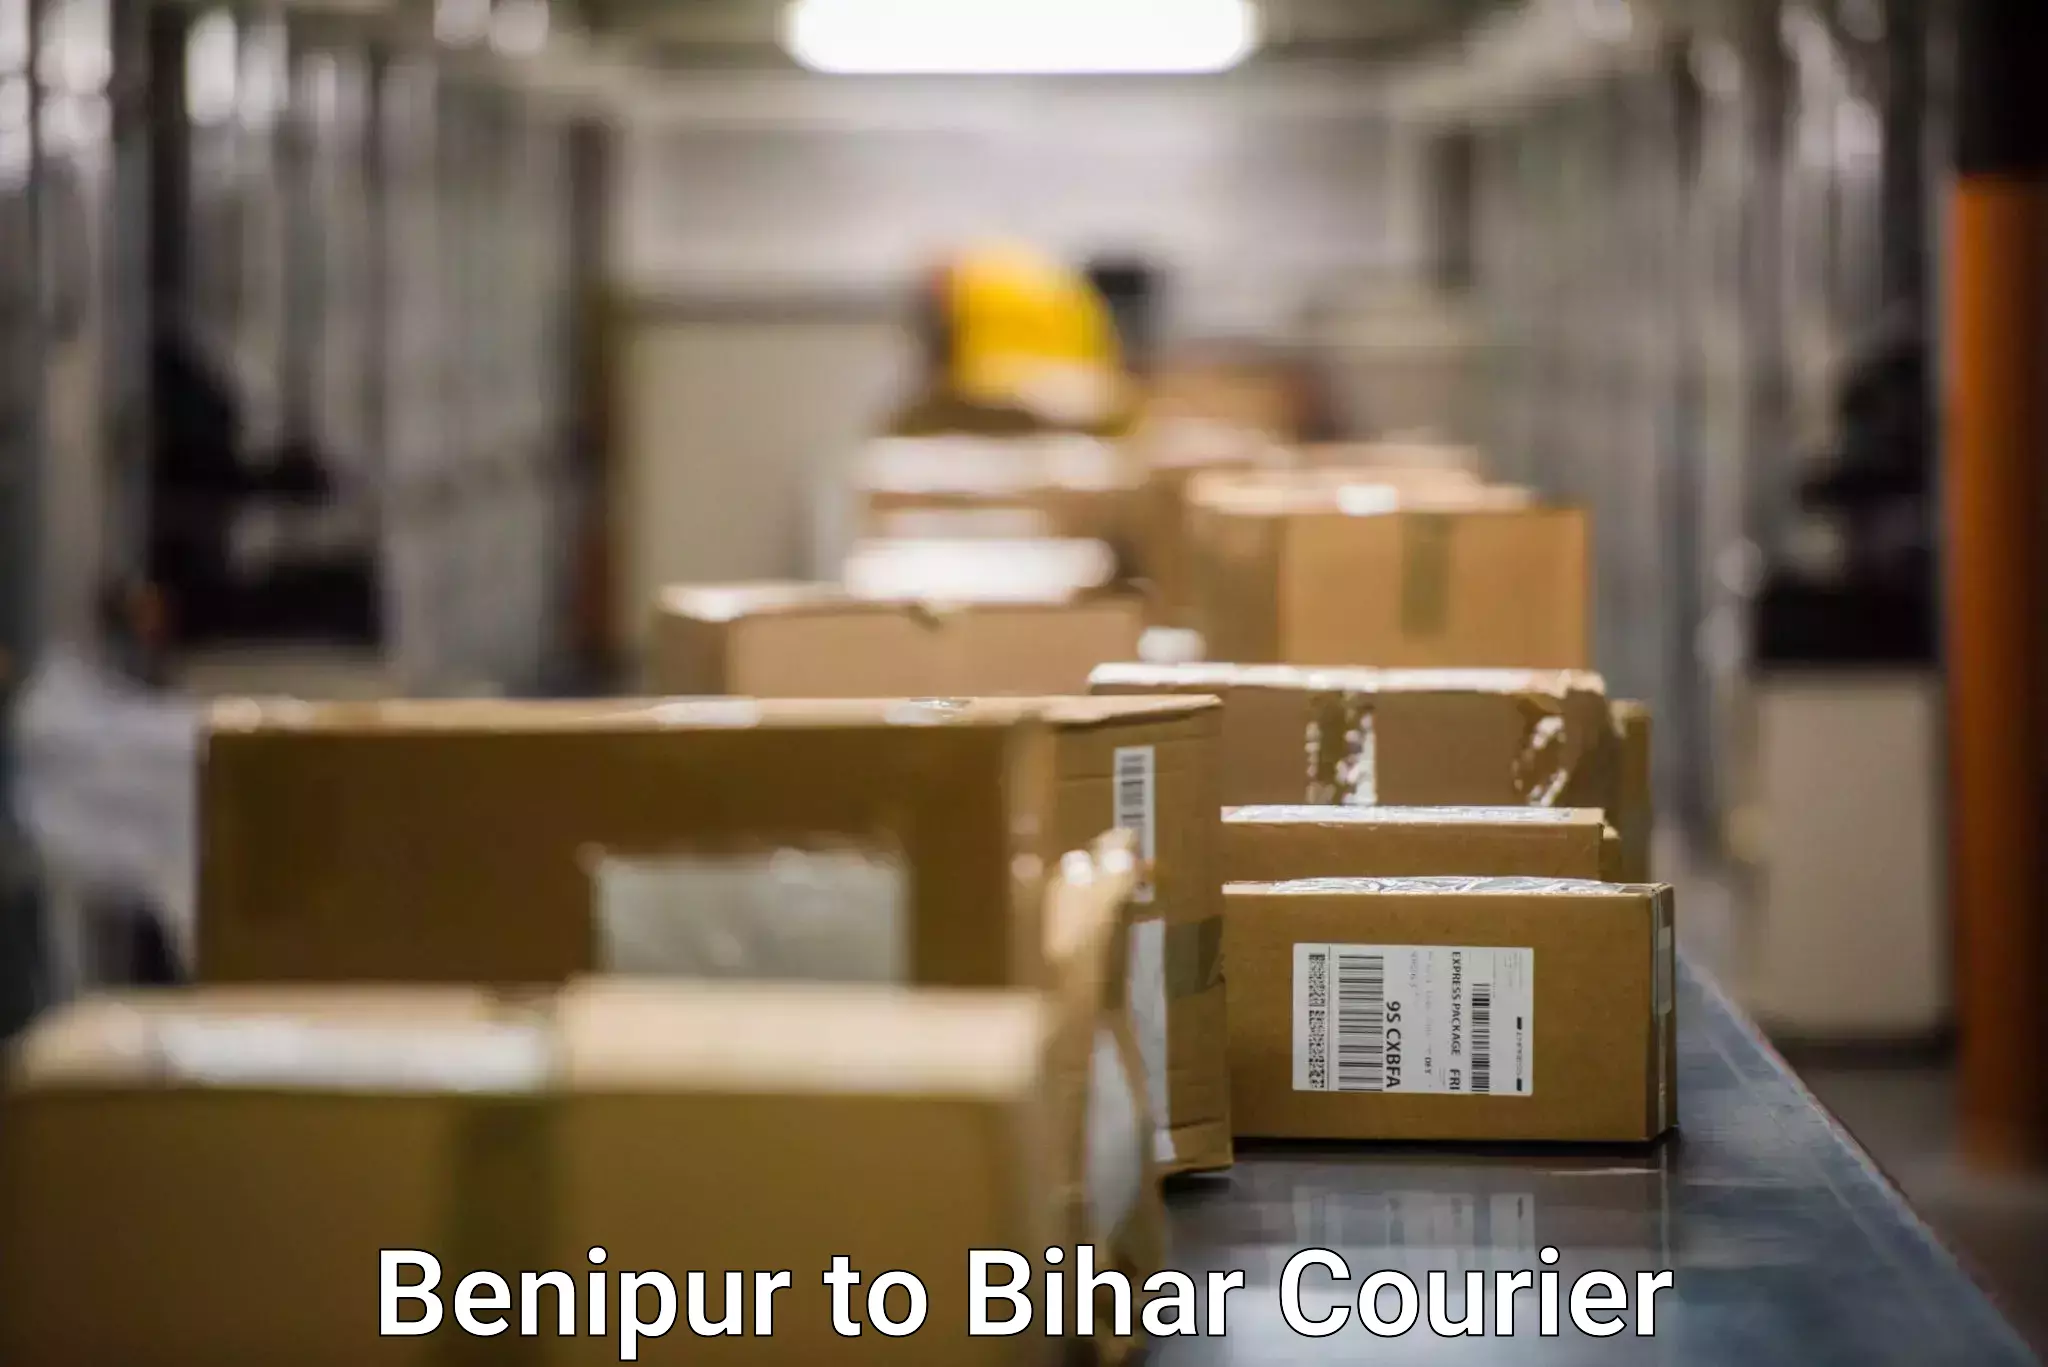 Courier rate comparison Benipur to Dhaka